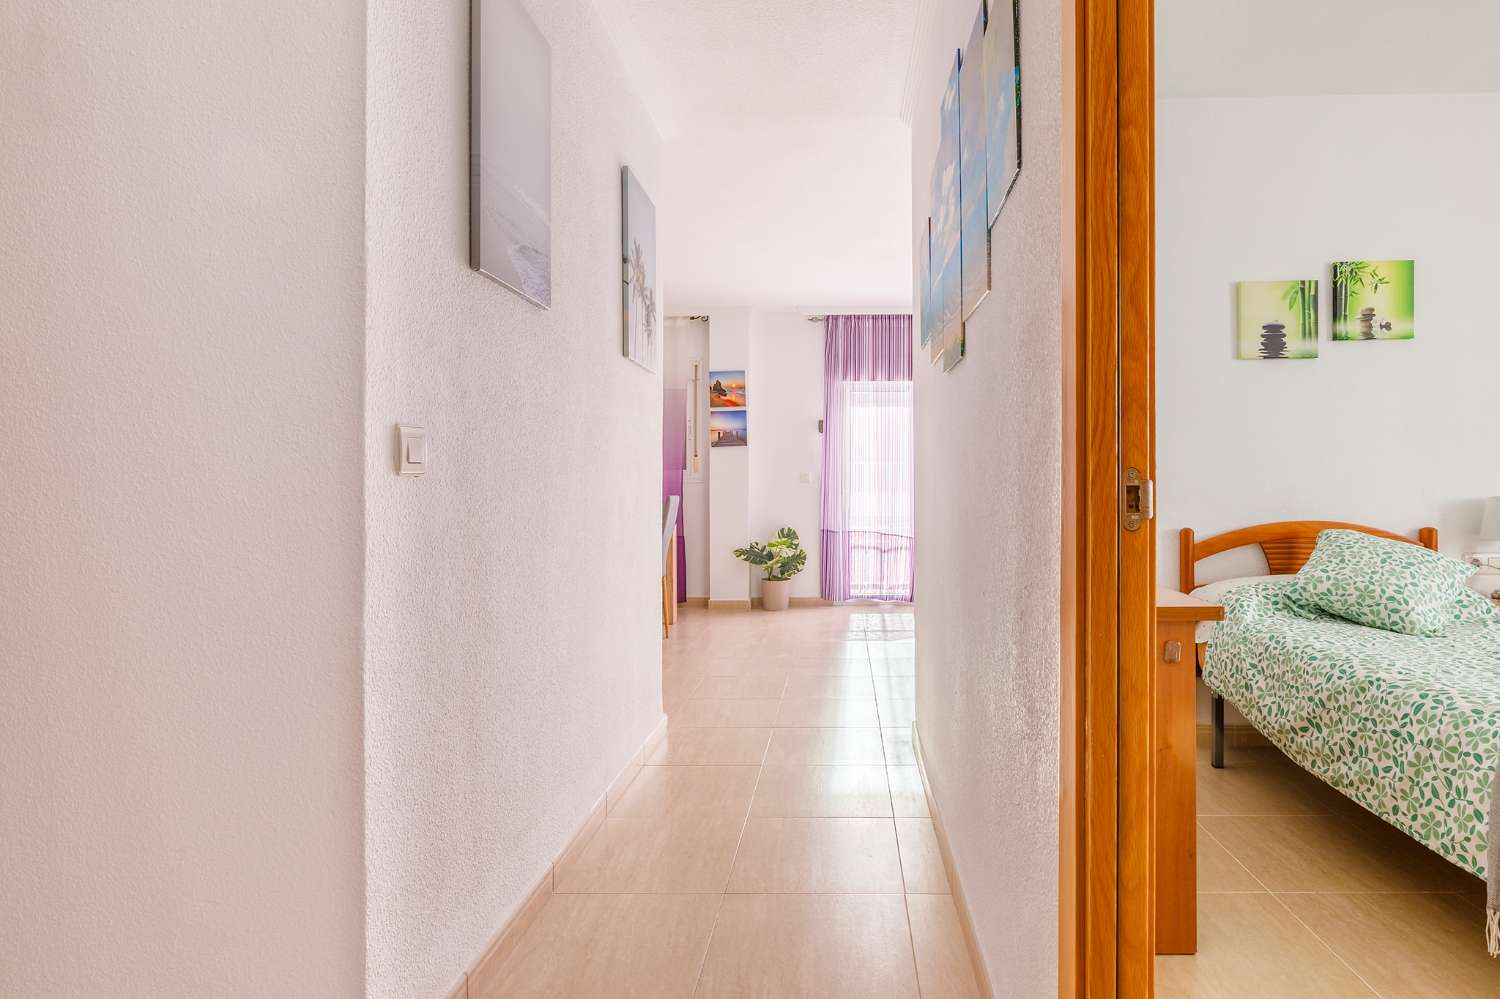 Apartment with two bedrooms, two bathrooms in the center of Torre del Mar, available in winter